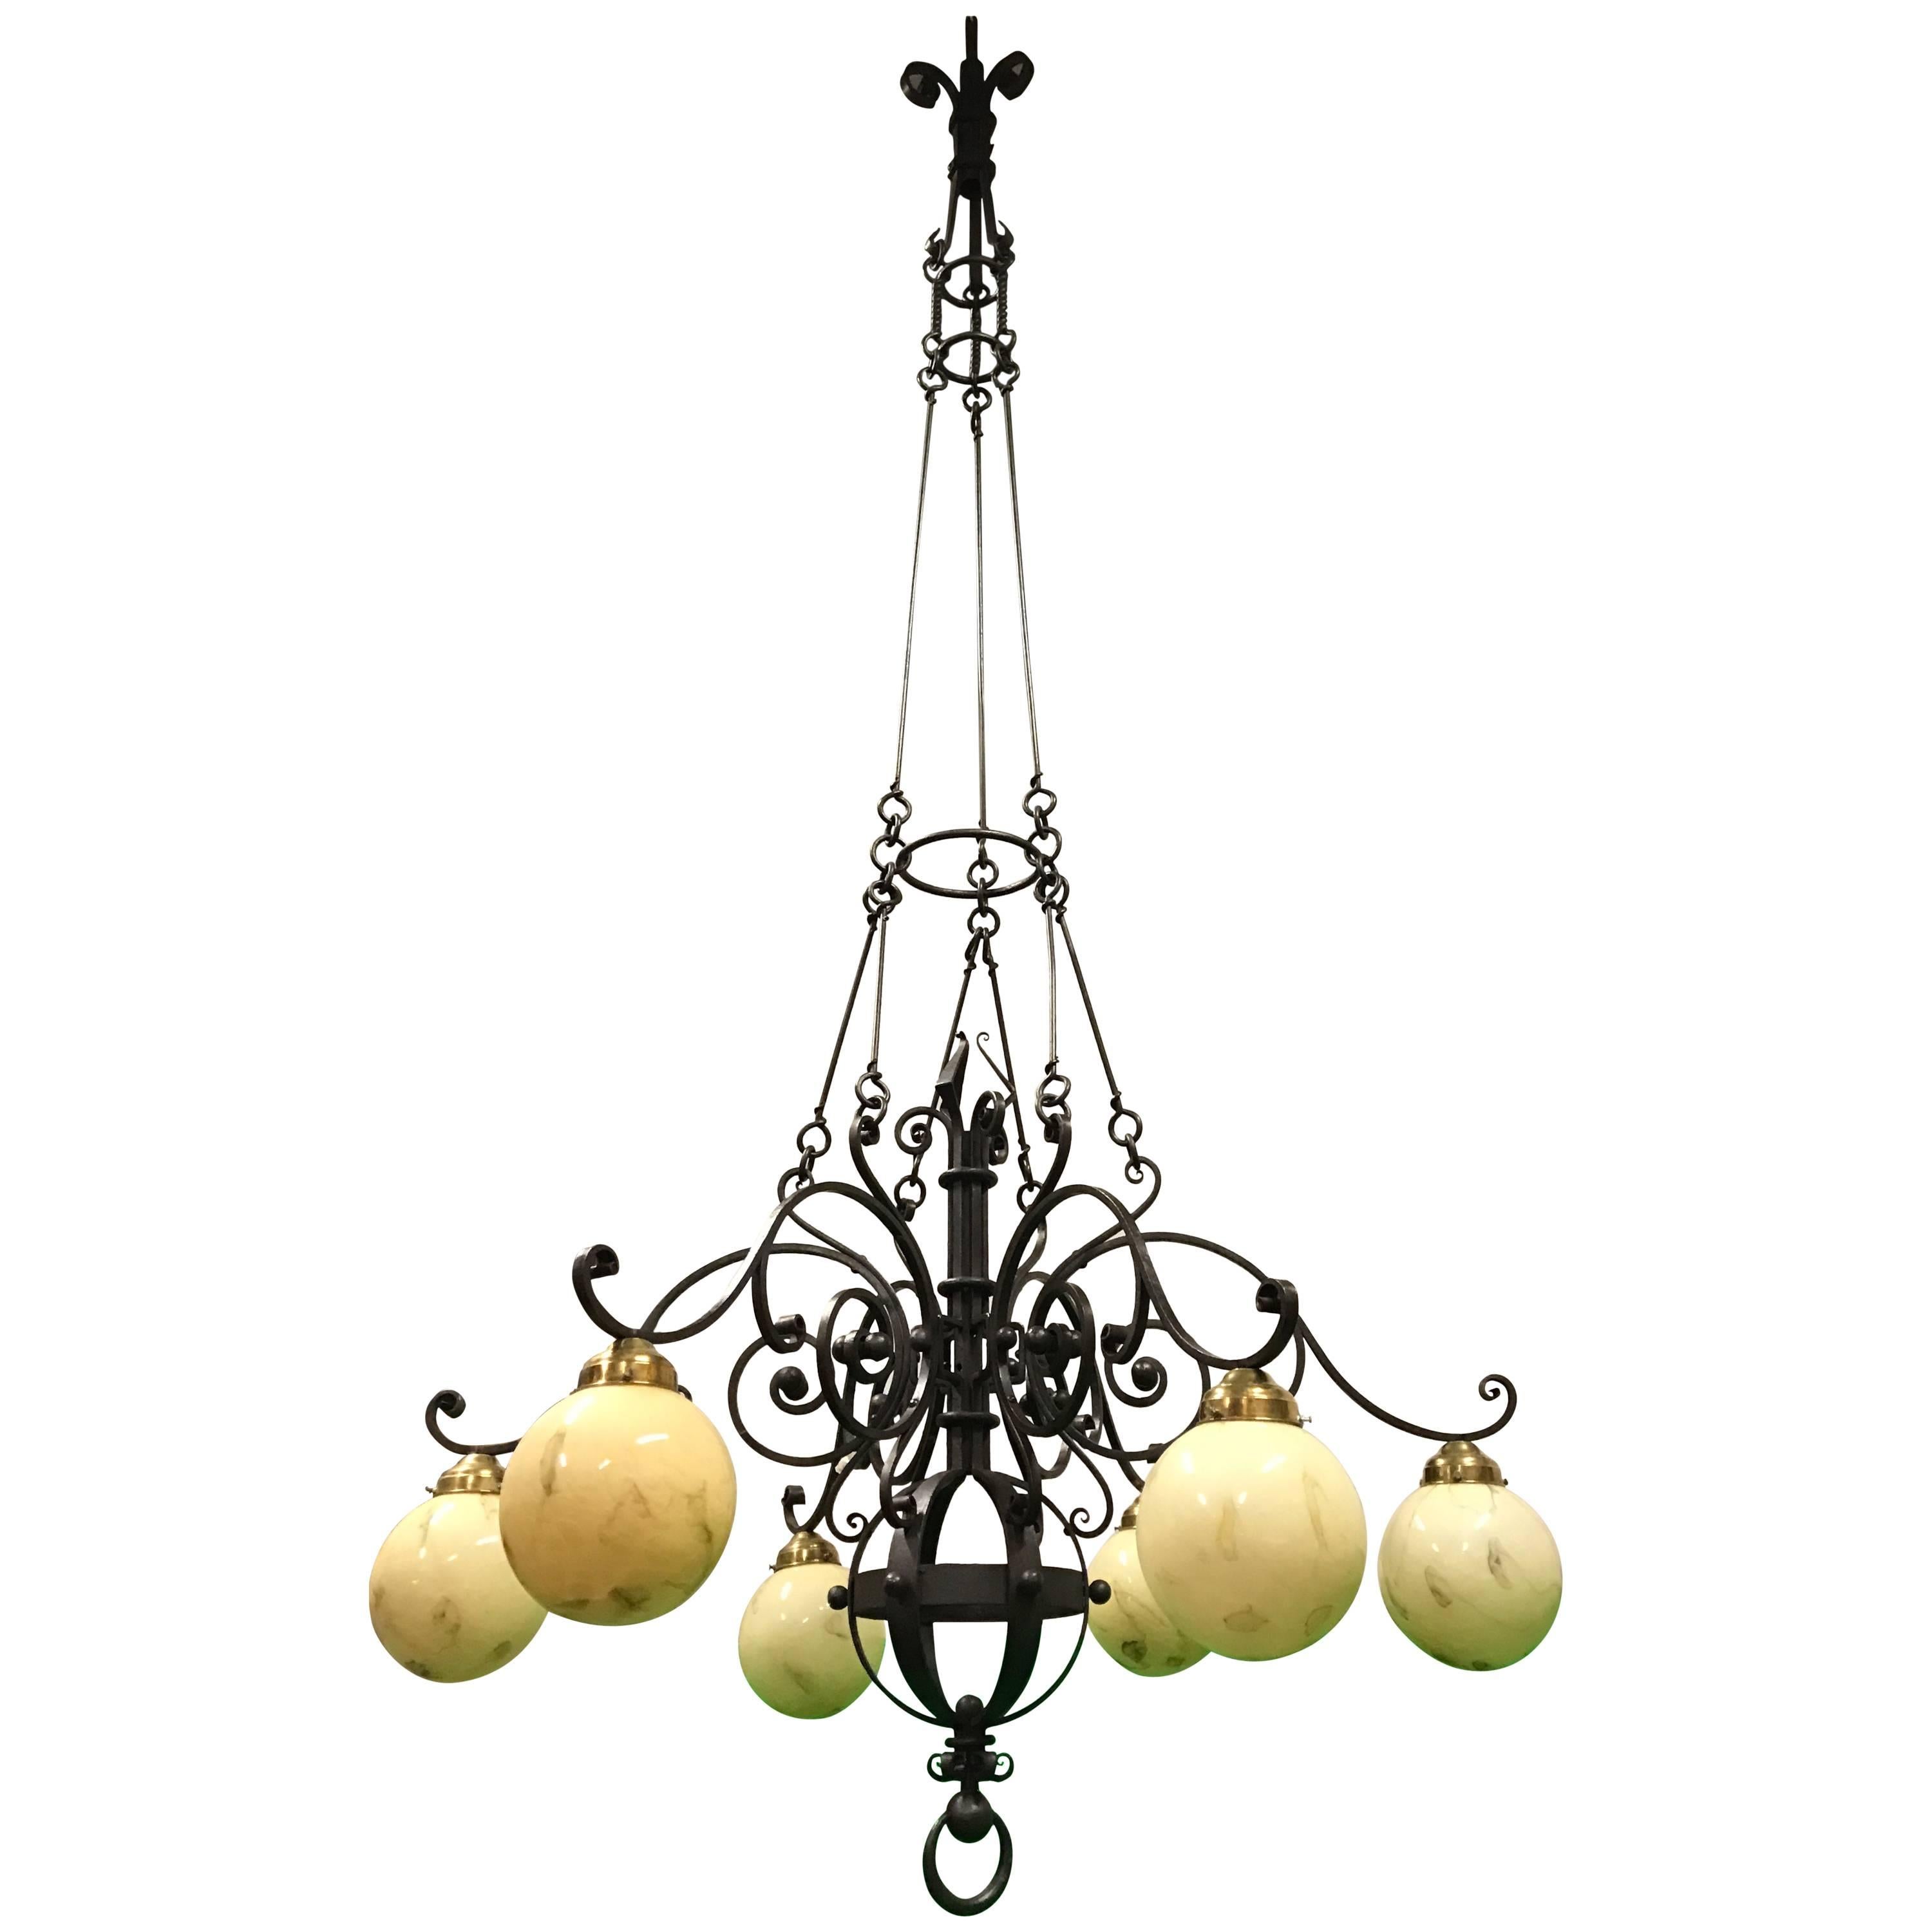  Huge 9 Feet High, Arts & Crafts Wrought Iron, Marbled Glass Chandelier Pendant  For Sale